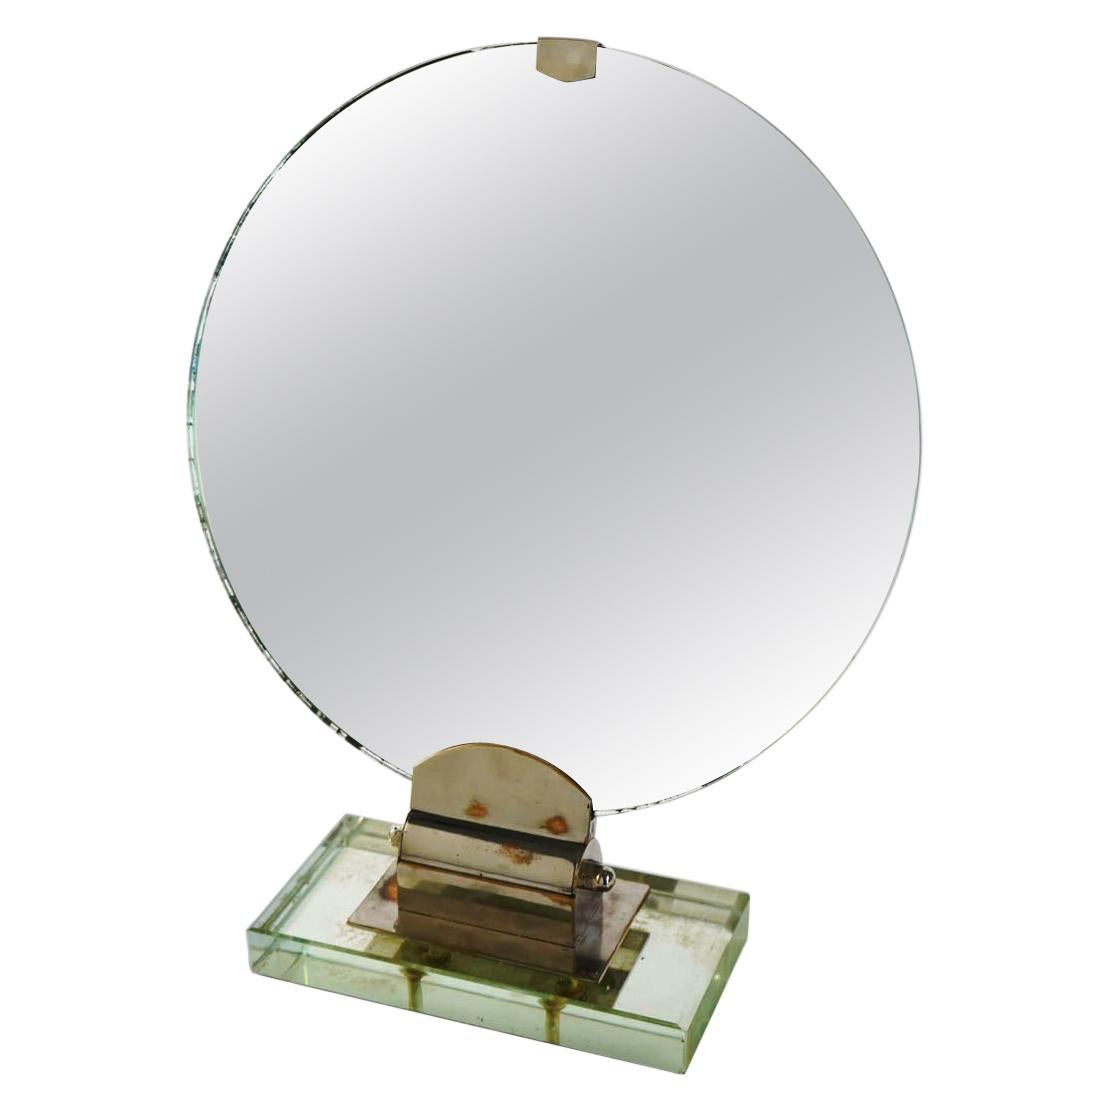 Rare Art Deco Period Small Orientable Table Mirror Attributed to Jacques Adnet For Sale